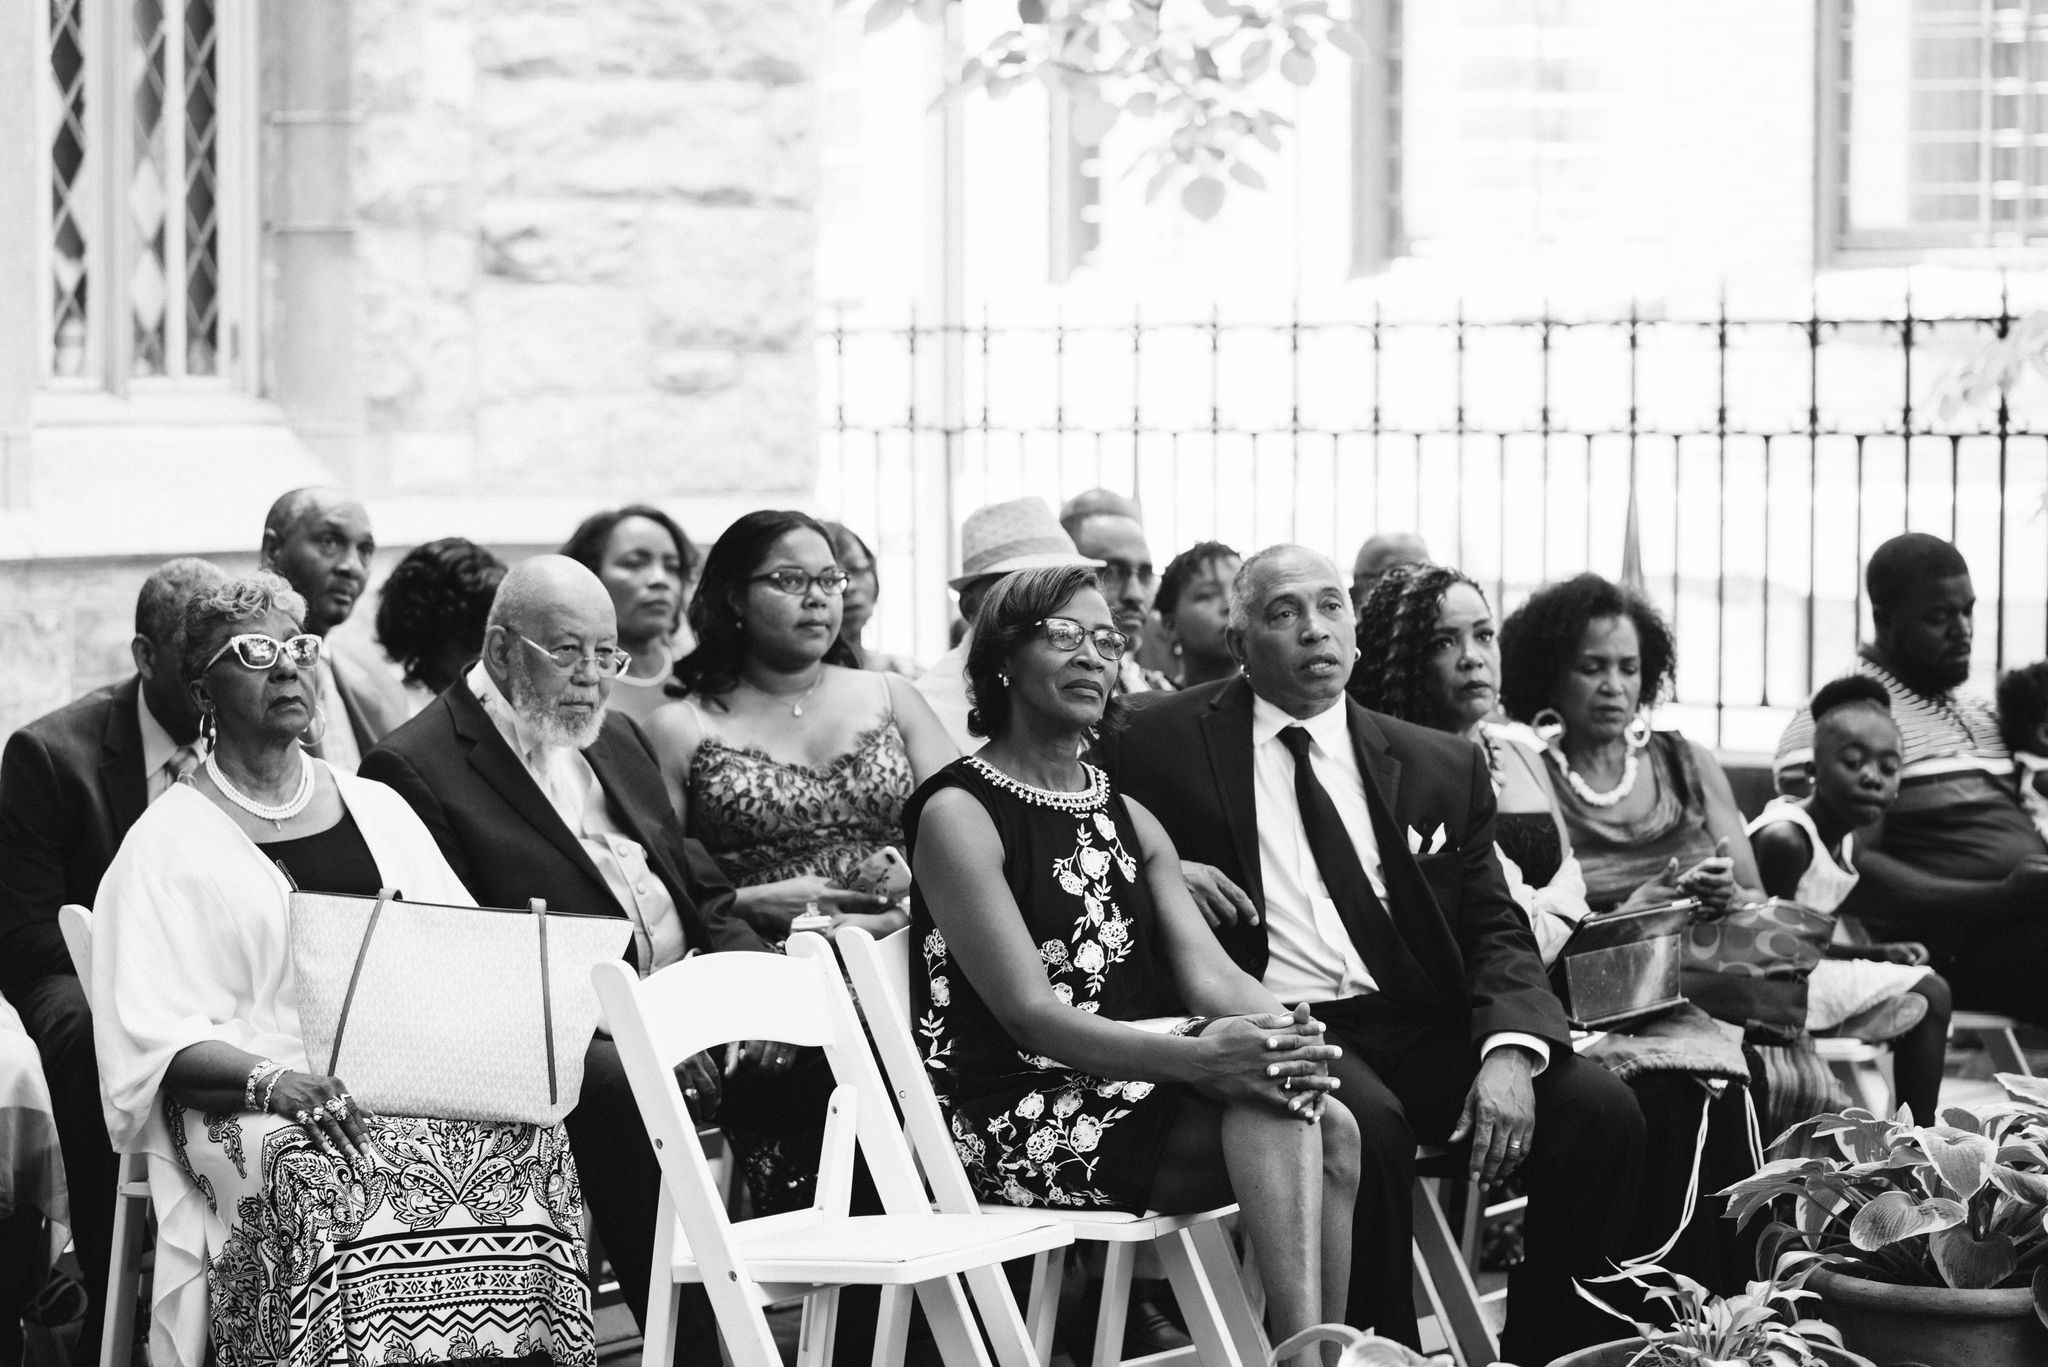  Baltimore, Maryland Wedding Photographer, Mount Vernon, Chase Court, Classic, Outdoor Ceremony, Garden, Romantic, Wedding Guests During Ceremony, Black and White Photo 